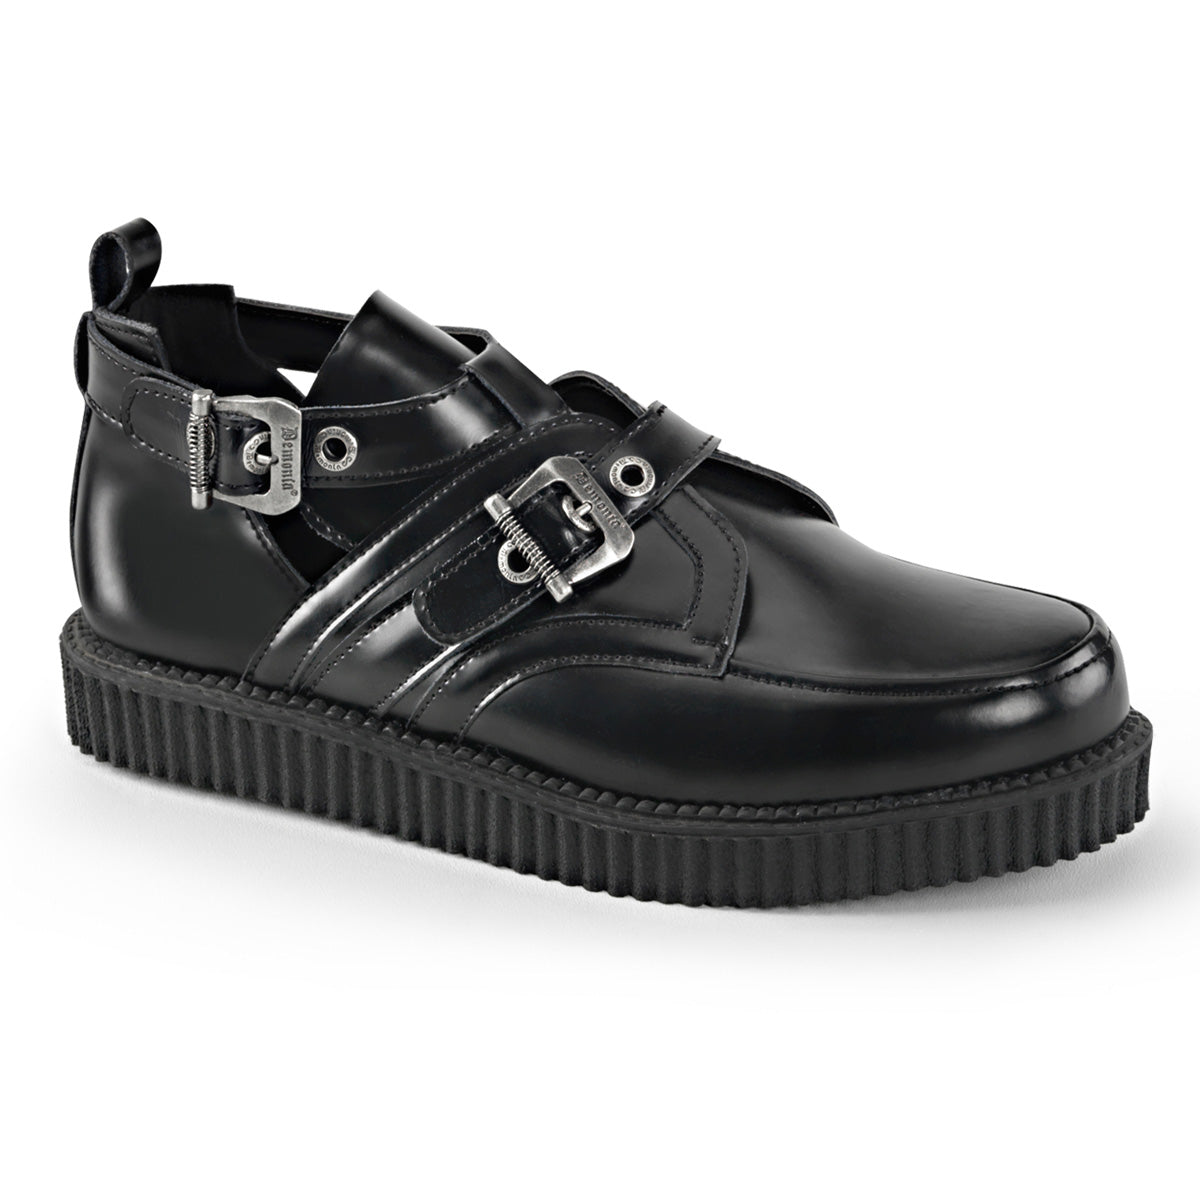 DemoniaCult Mens Low Shoe CREEPER-615 Blk Leather